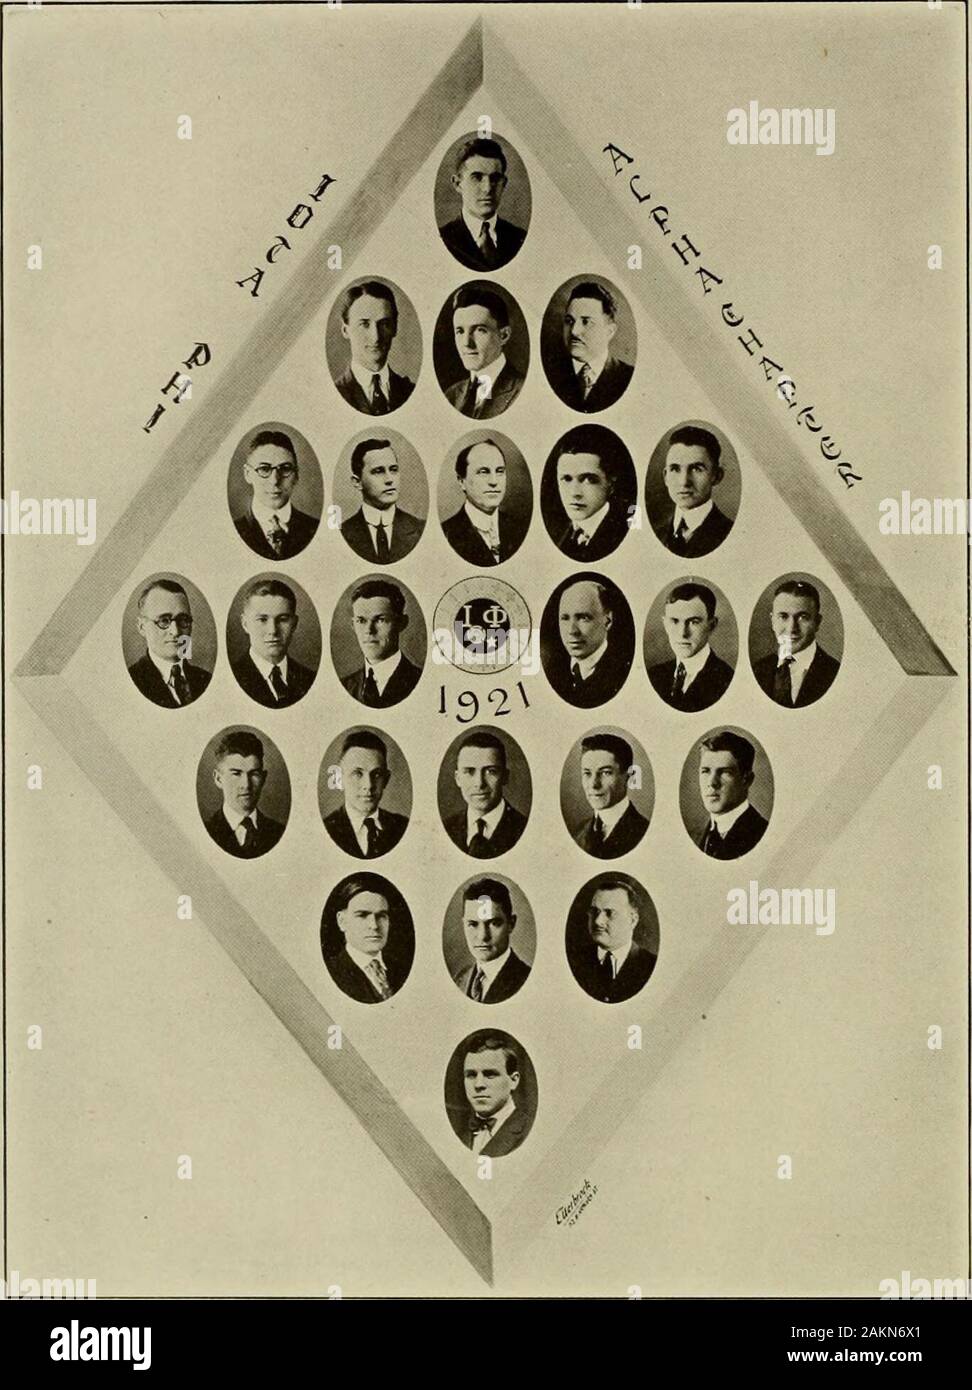 Terra Mariae . ISlu Sigma Omicron Founded January 26, 1916, at University of MarylandPetitioning Phi Delta Theta COLORS Roval Purple and OldGold FLOWER Tio-er Lily PUBLICATION Nu Sigma News FRATRES IN FACULTATE Dr. S. S. BuckeyProf. J. B. Wentz Prof. L. J. HodginsProf. O. C. Bruce FRATRES IN URBE G. B. Hockman 20 E. V. Miller 19 J. P. Jones 18 FRATRES IN^ UNIVERSITATE Class of Xiiictccii T:enty-oneE. C. Donaldson W. T. Gardner R.V. Haig Fred Slanker R. W. Heller Class of  ijictccn Tzventy-tzvoA. S. Best W. F. McDonald E. F. Darner G. V. Nelson W. W. Kirby O. P. H. Reinmuth V. G. Malcolm H. A Stock Photo